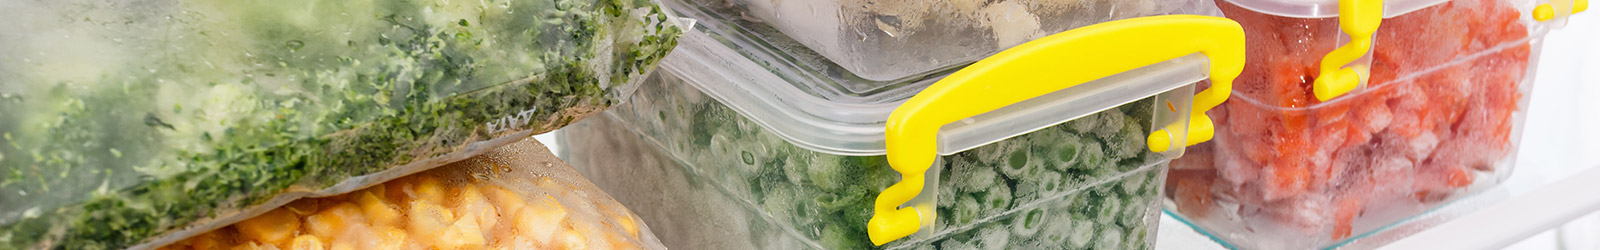 close-up of food stored in plastic containers